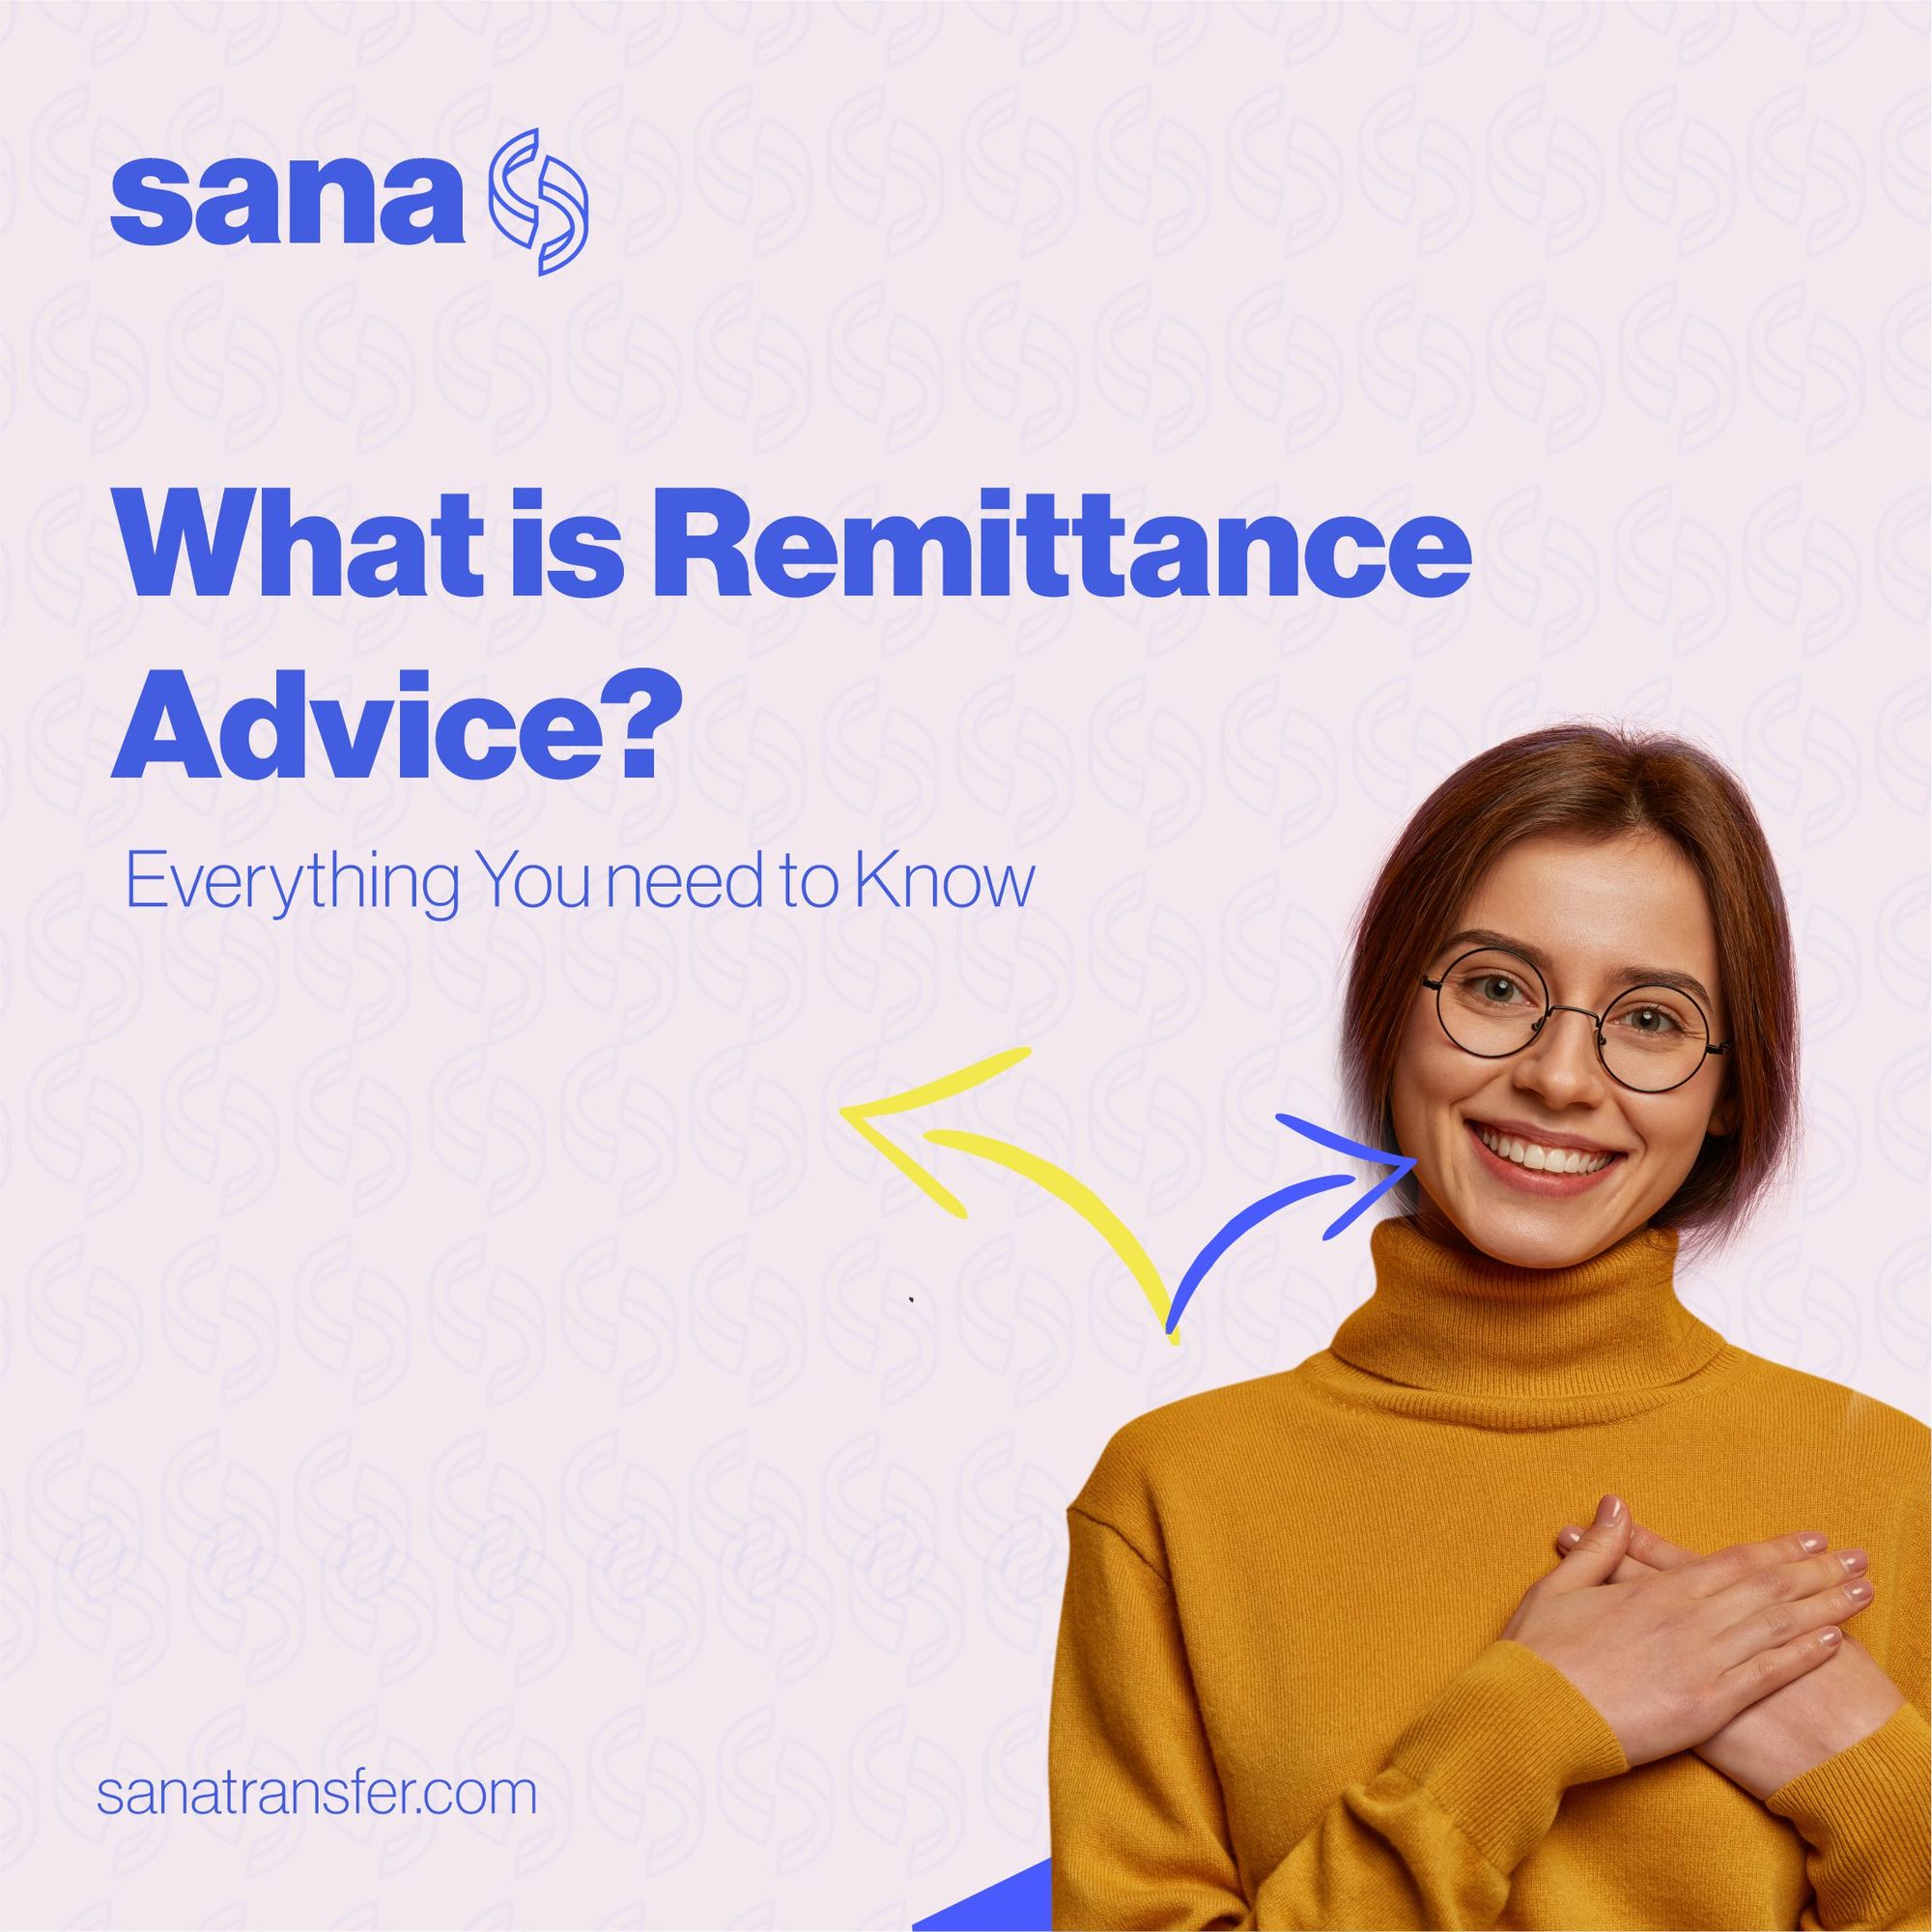 What is Remittance Advice?